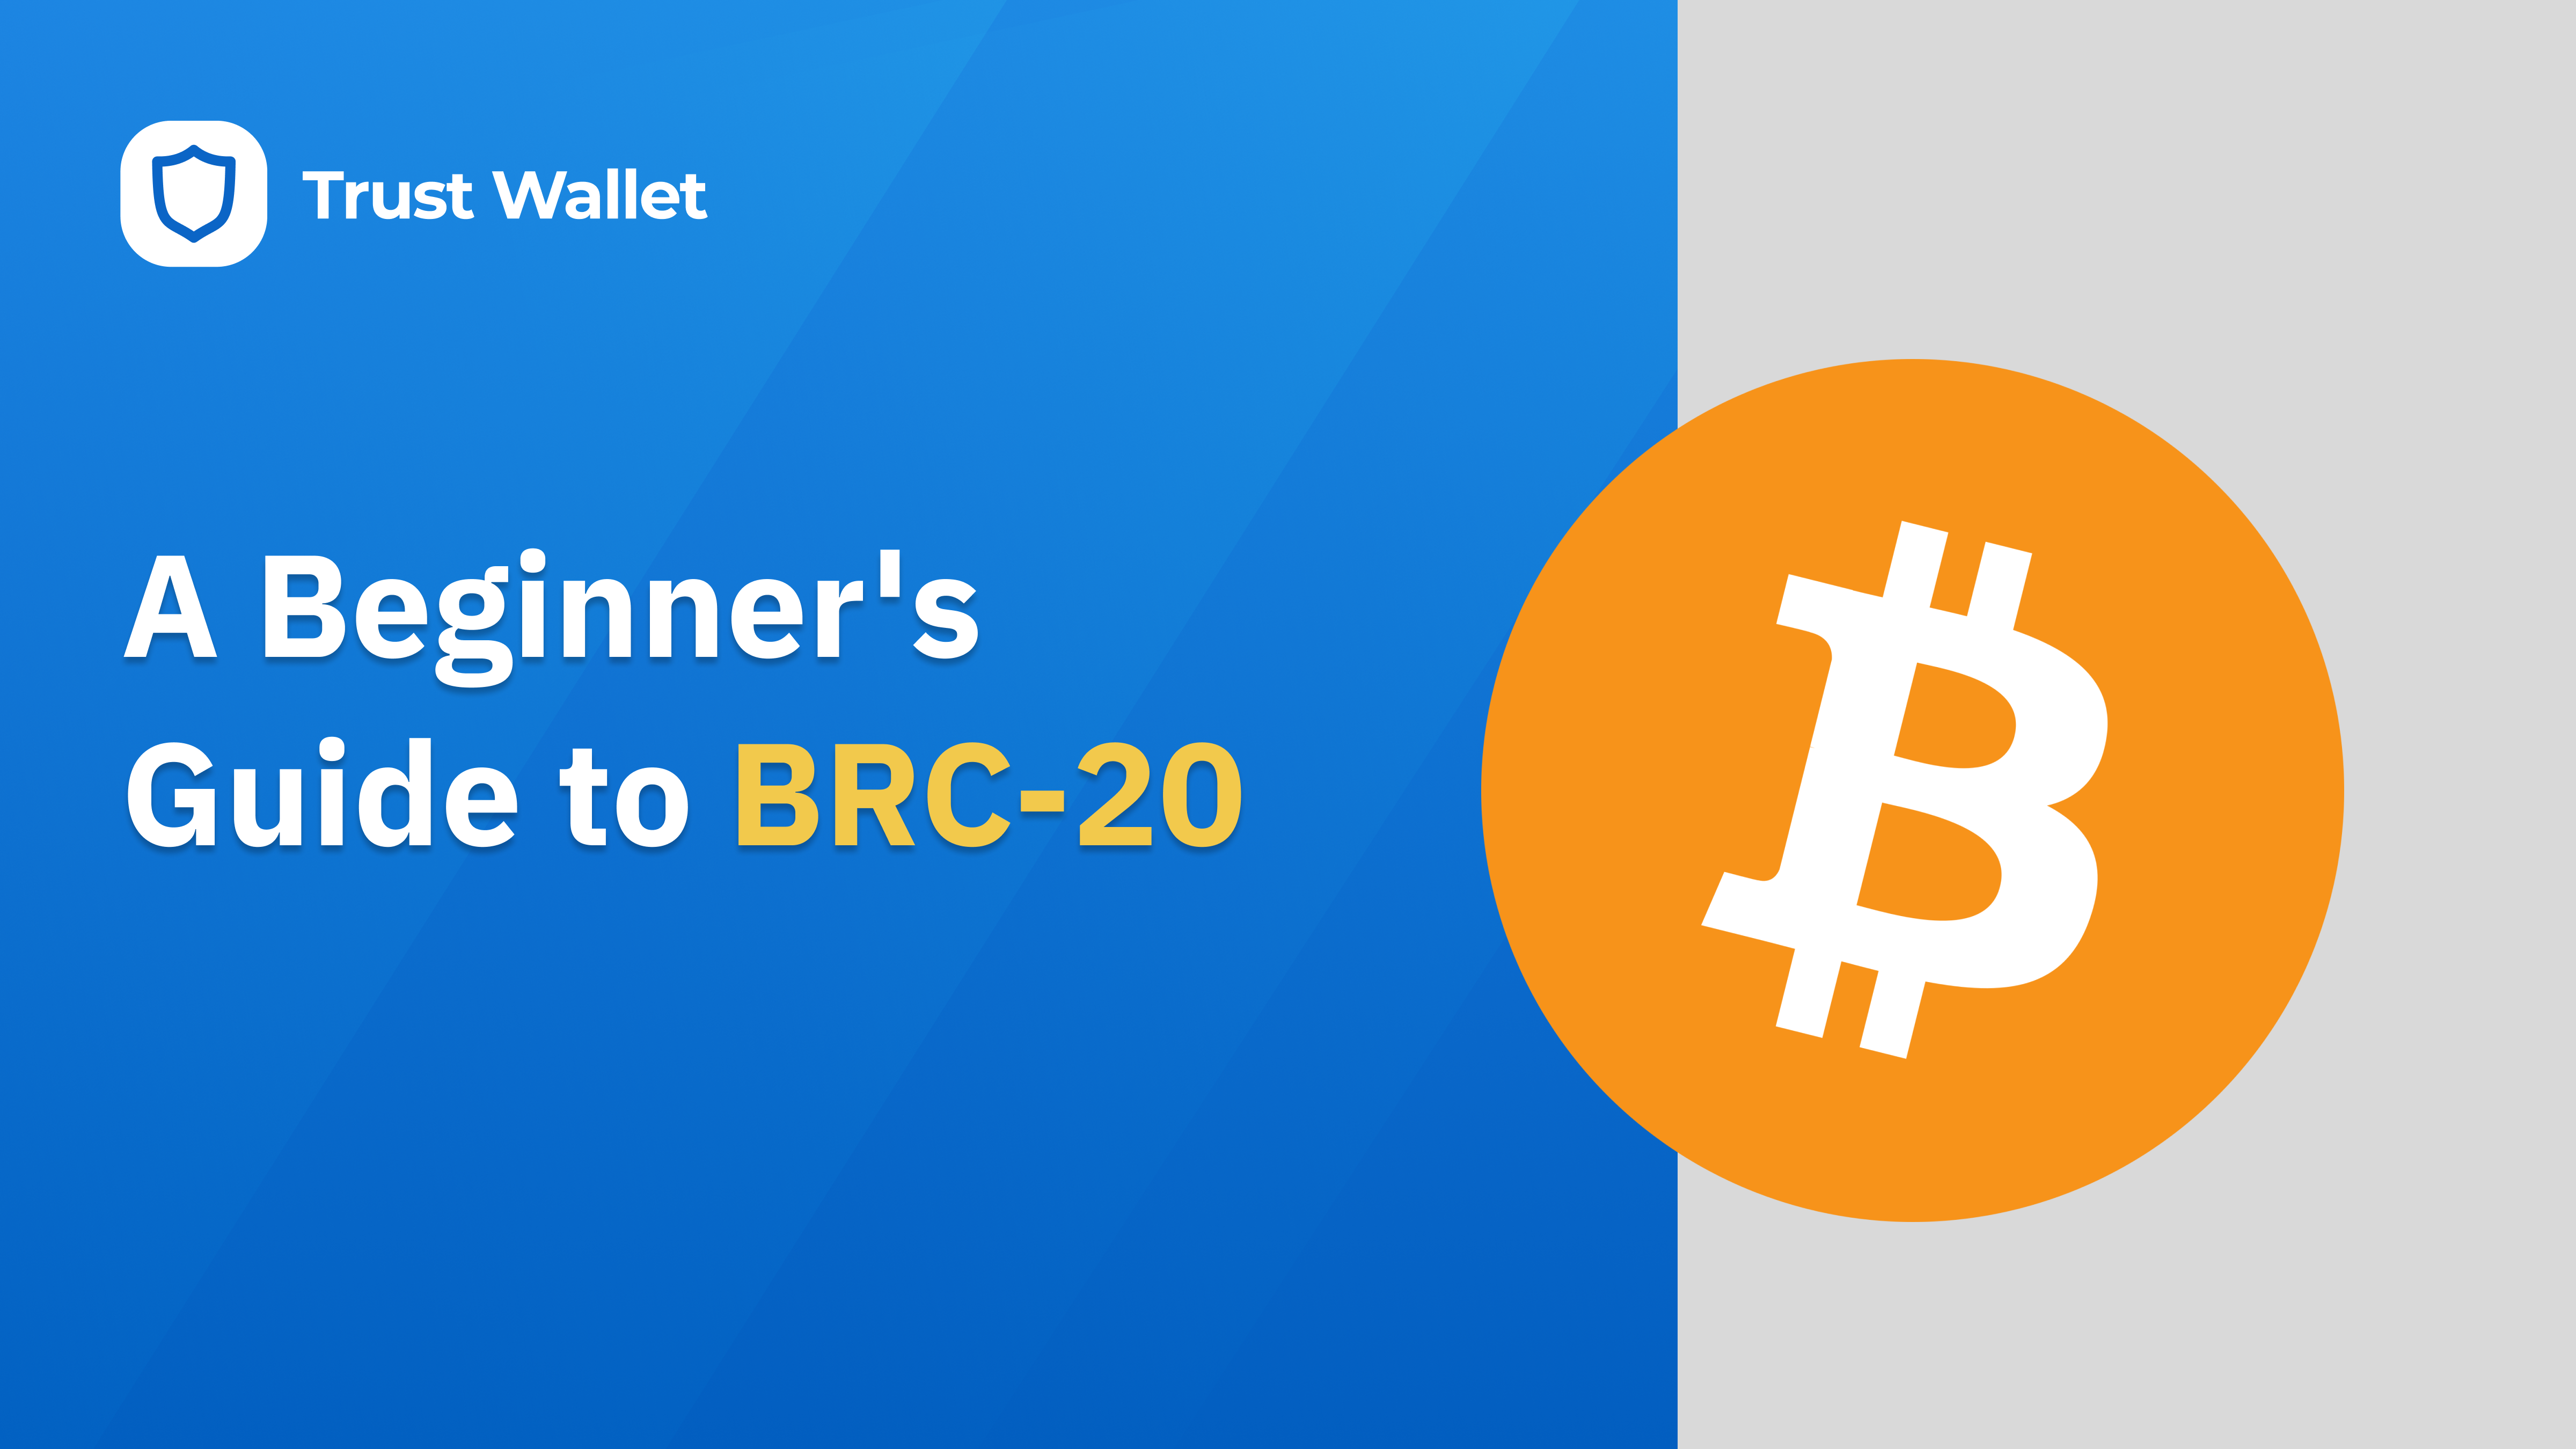 A Beginner's Guide to BRC-20